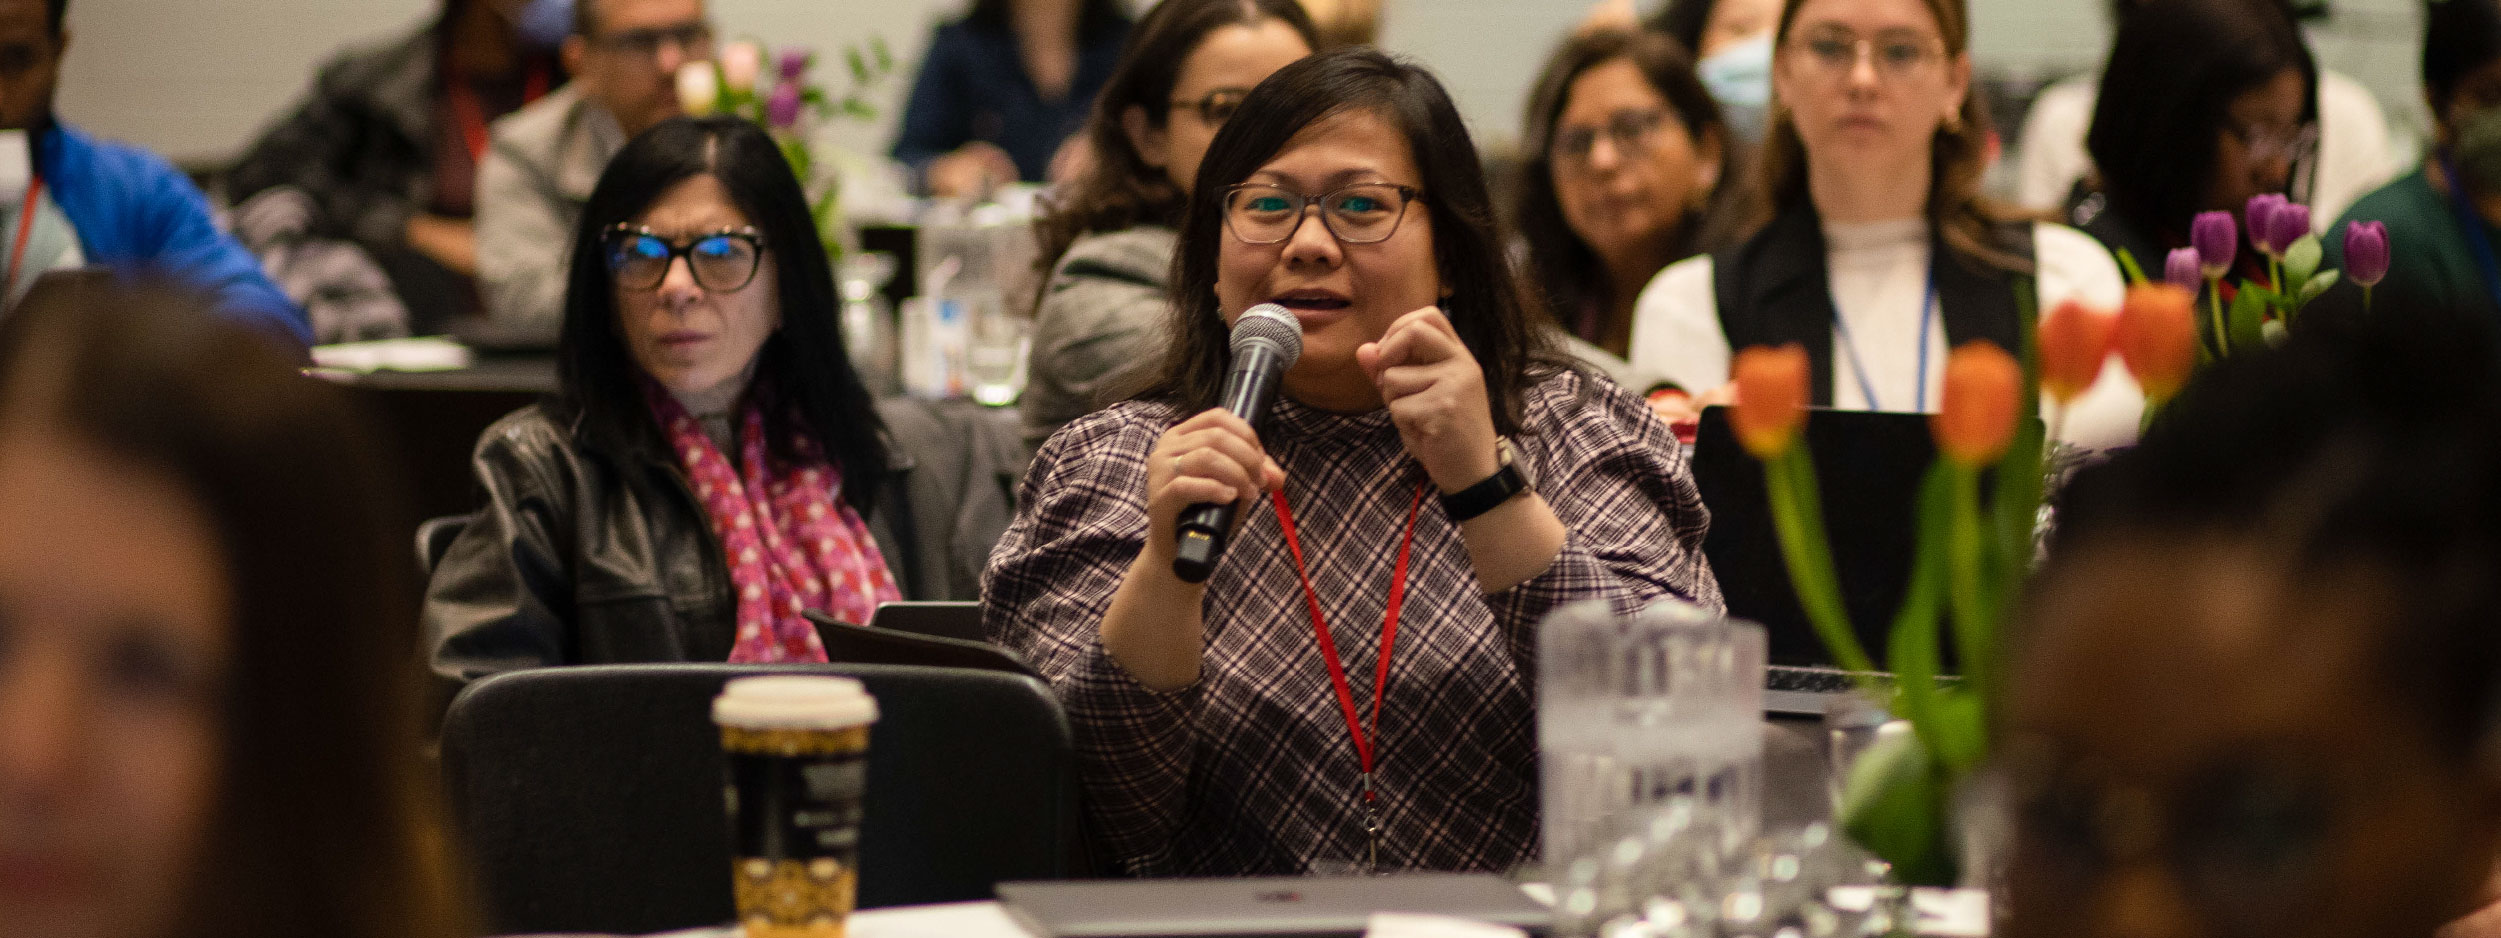 Image of stipend student Rica Agnes Castaneda speaking at a conference